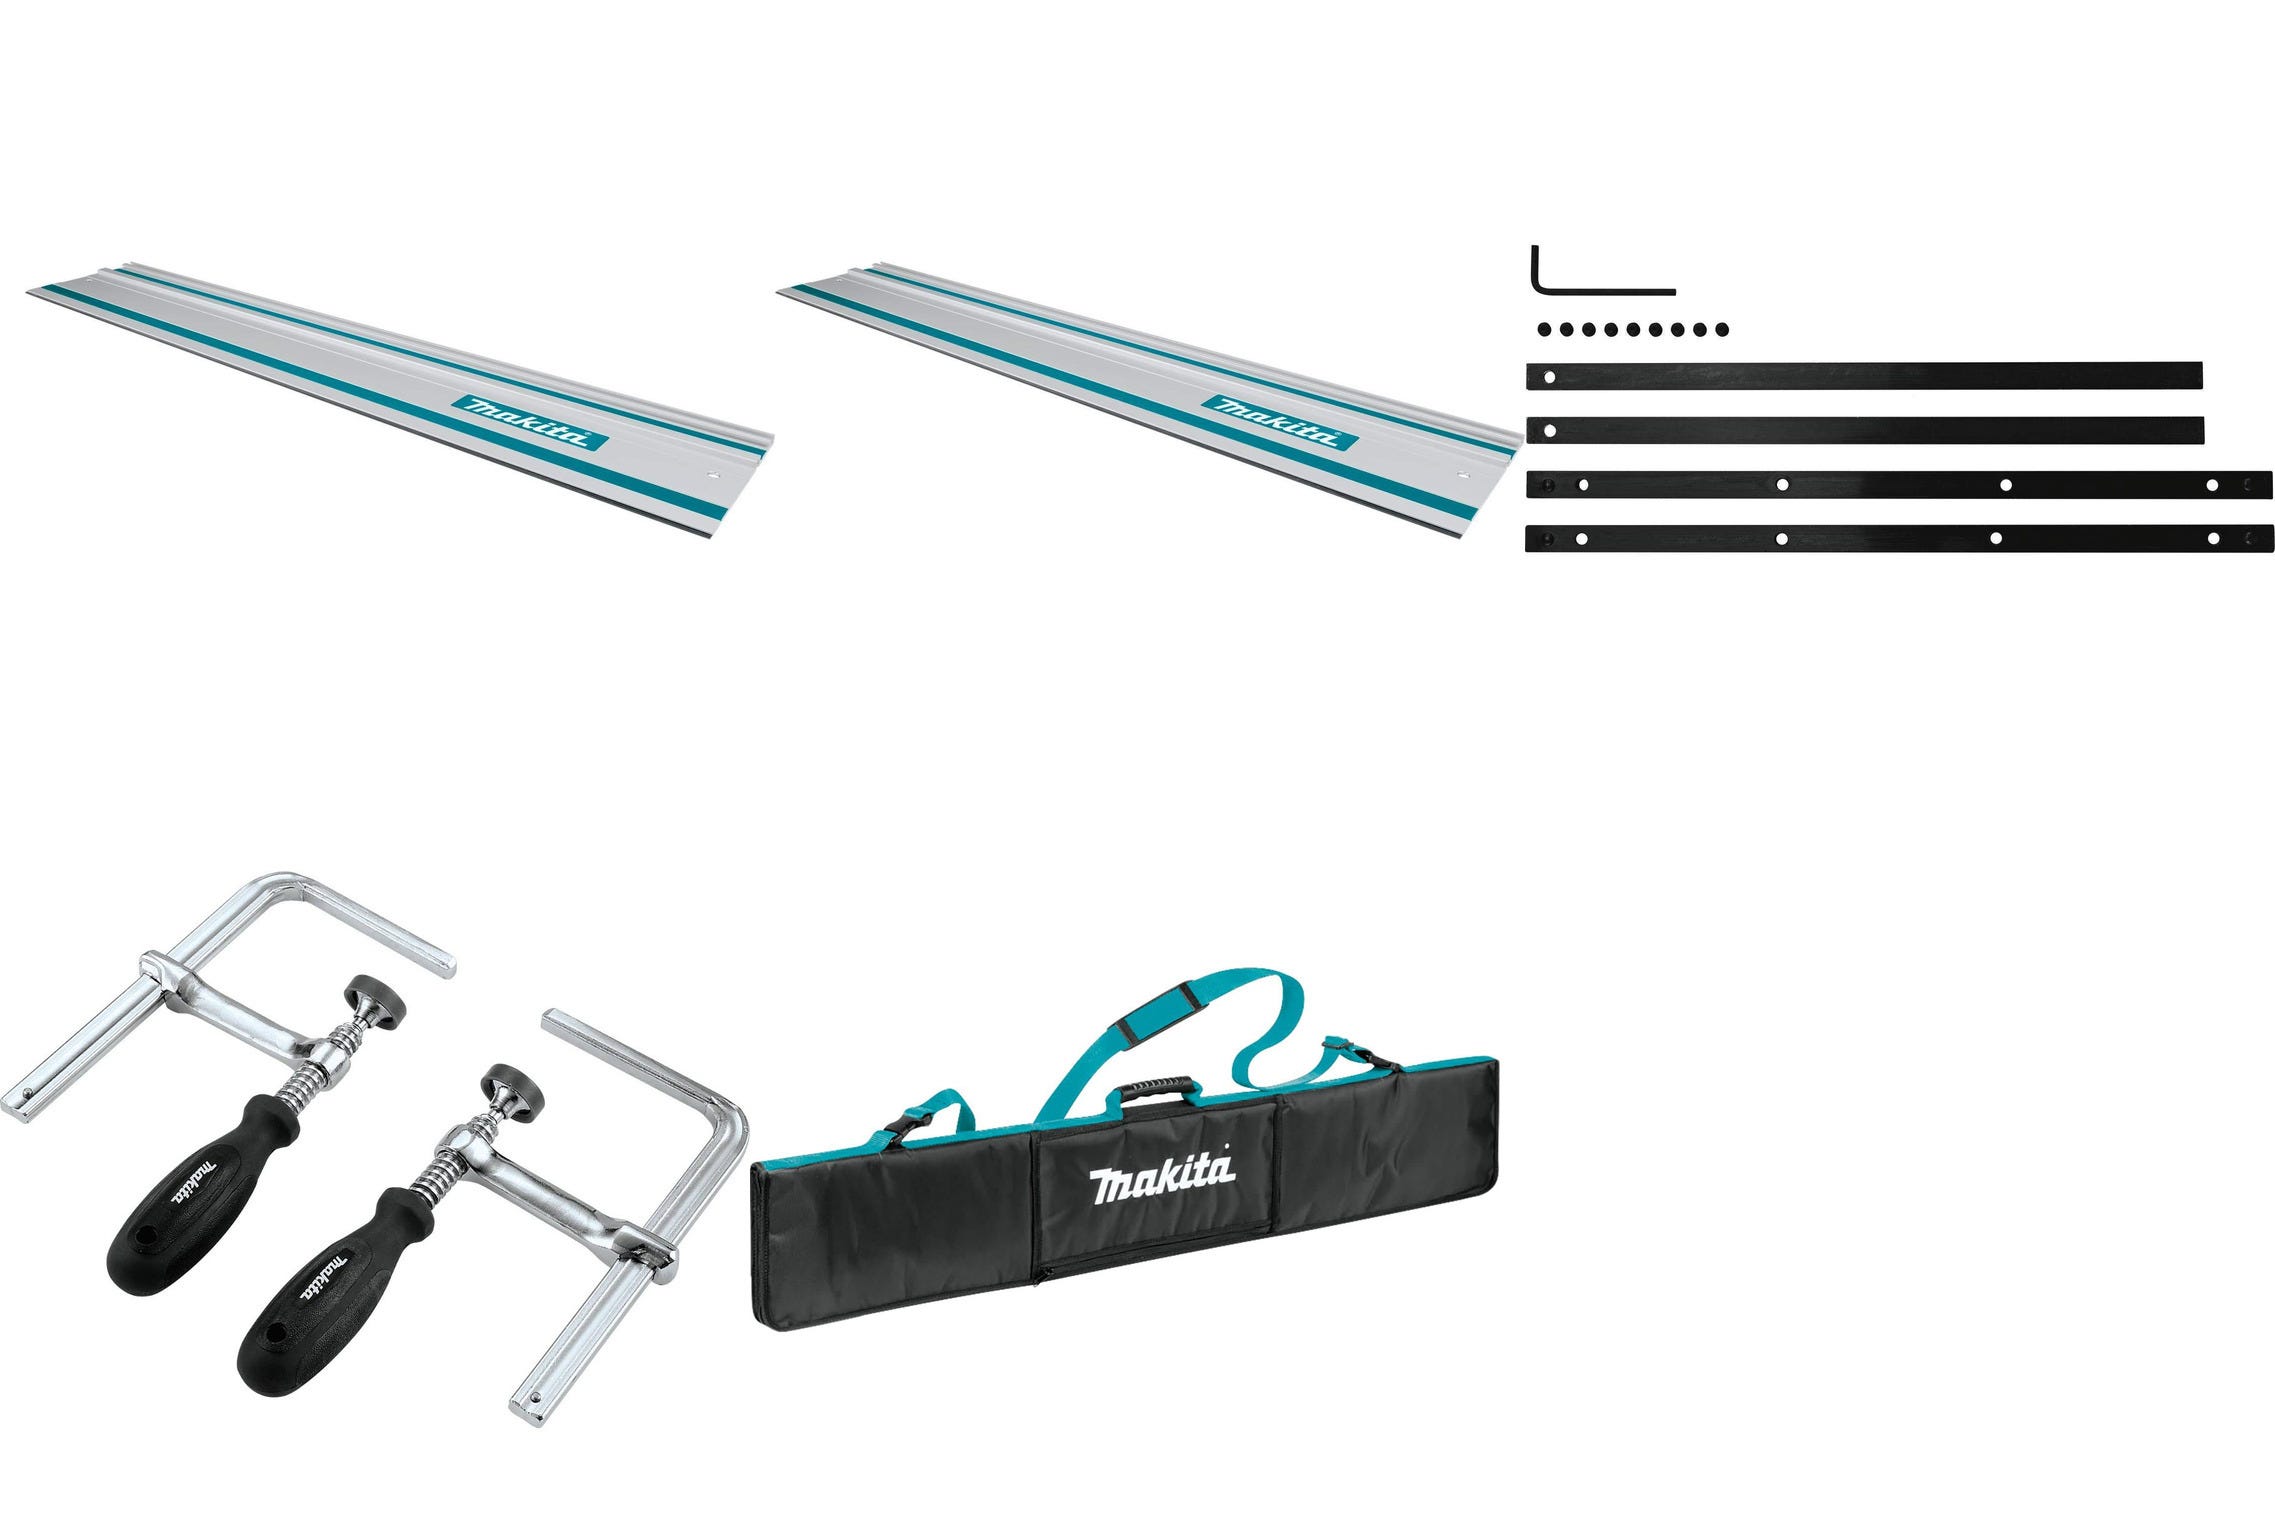 Makita Track Saw Accessories Bundle Guide Rail, Connector Kit, Clamp and  Bag